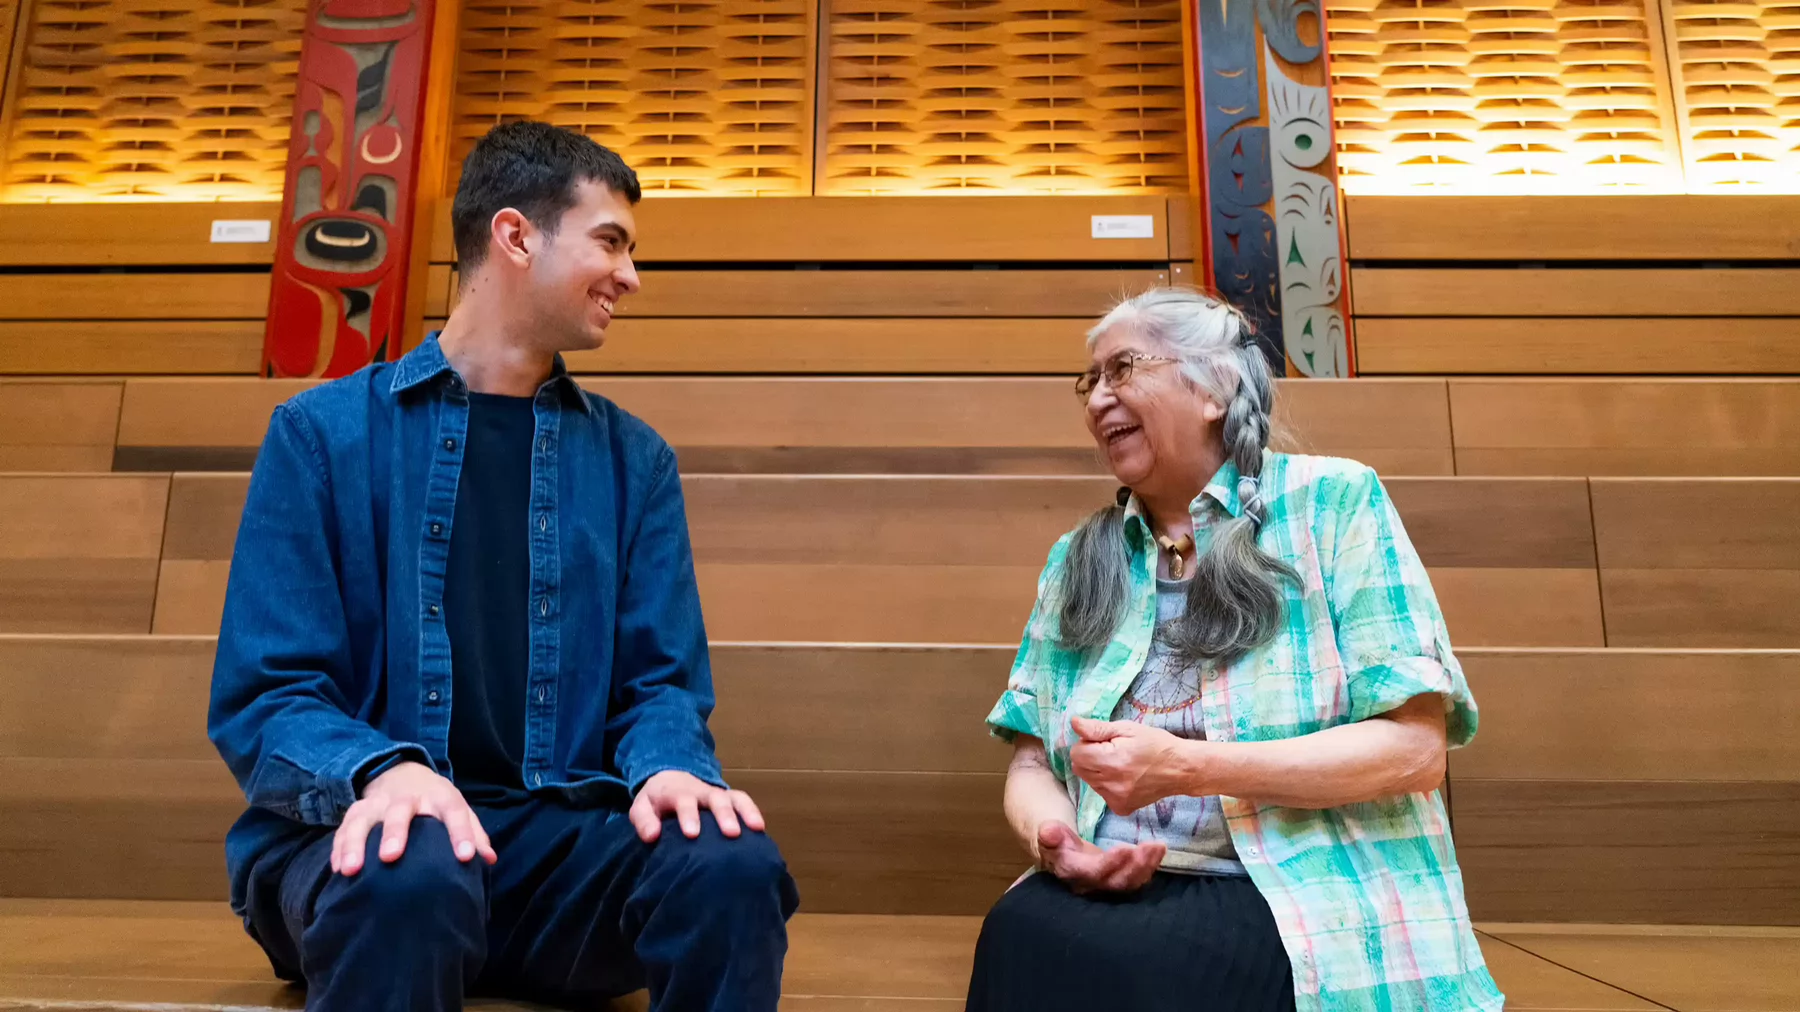 Ryder and Indigenous elder smiling in conversation in First People's House at UVic